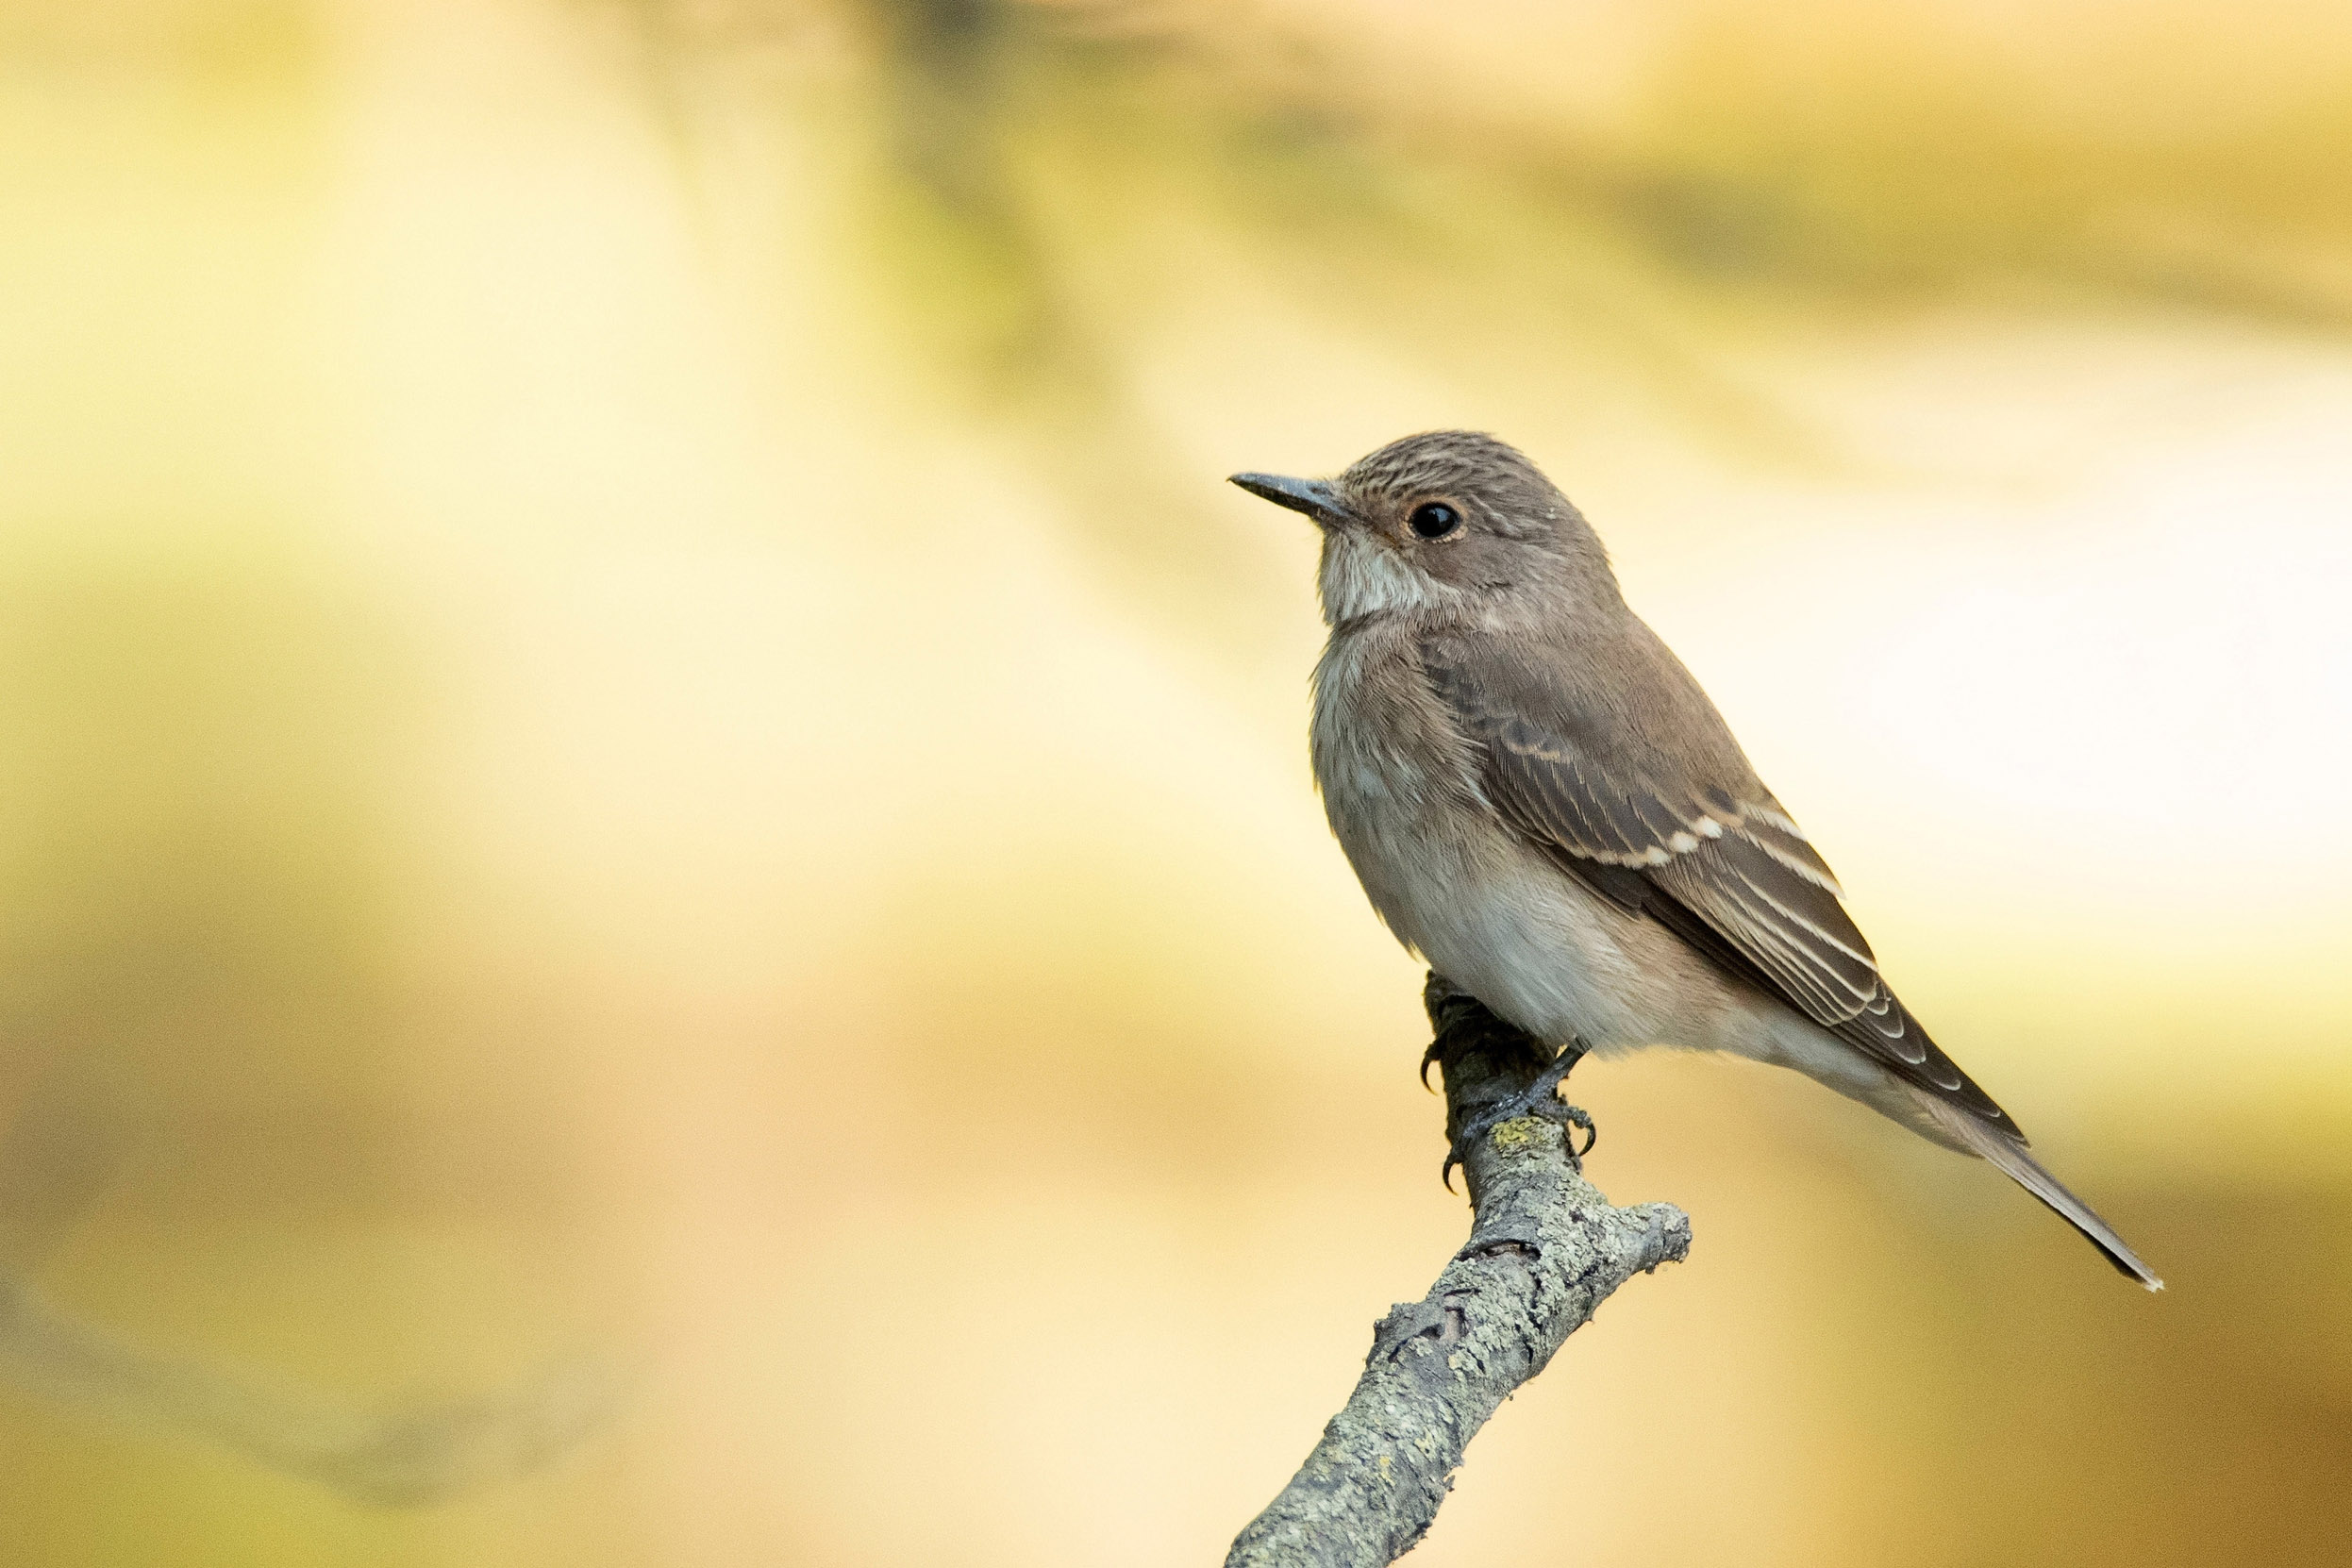 A lone Spotted Flycatcher perched on a branch.